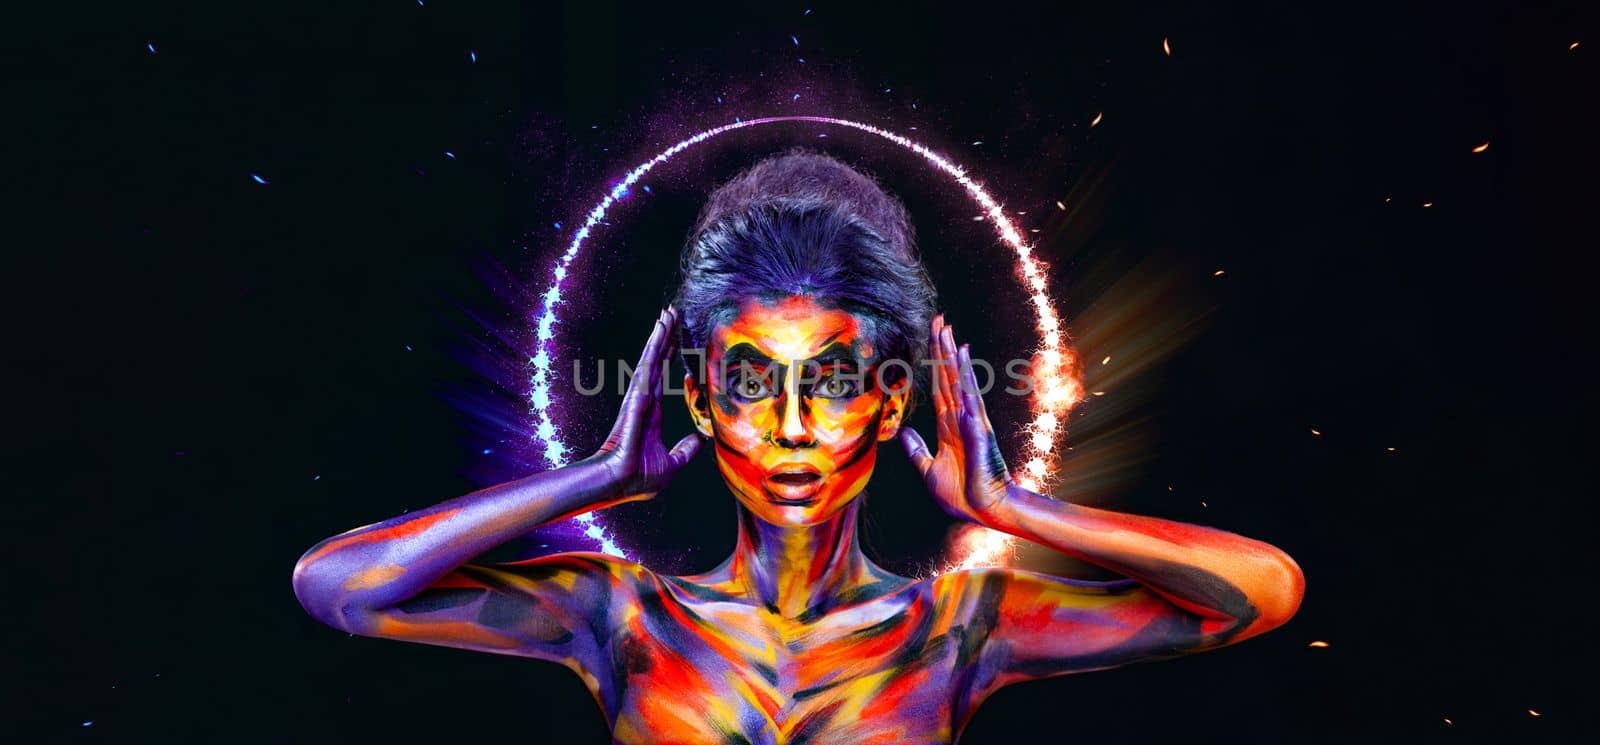 Girl in a glowing neon circle. Woman in color body painting on her face. Cover art for your mixtape, video, song or podcast. Design for book covers. by MikeOrlov